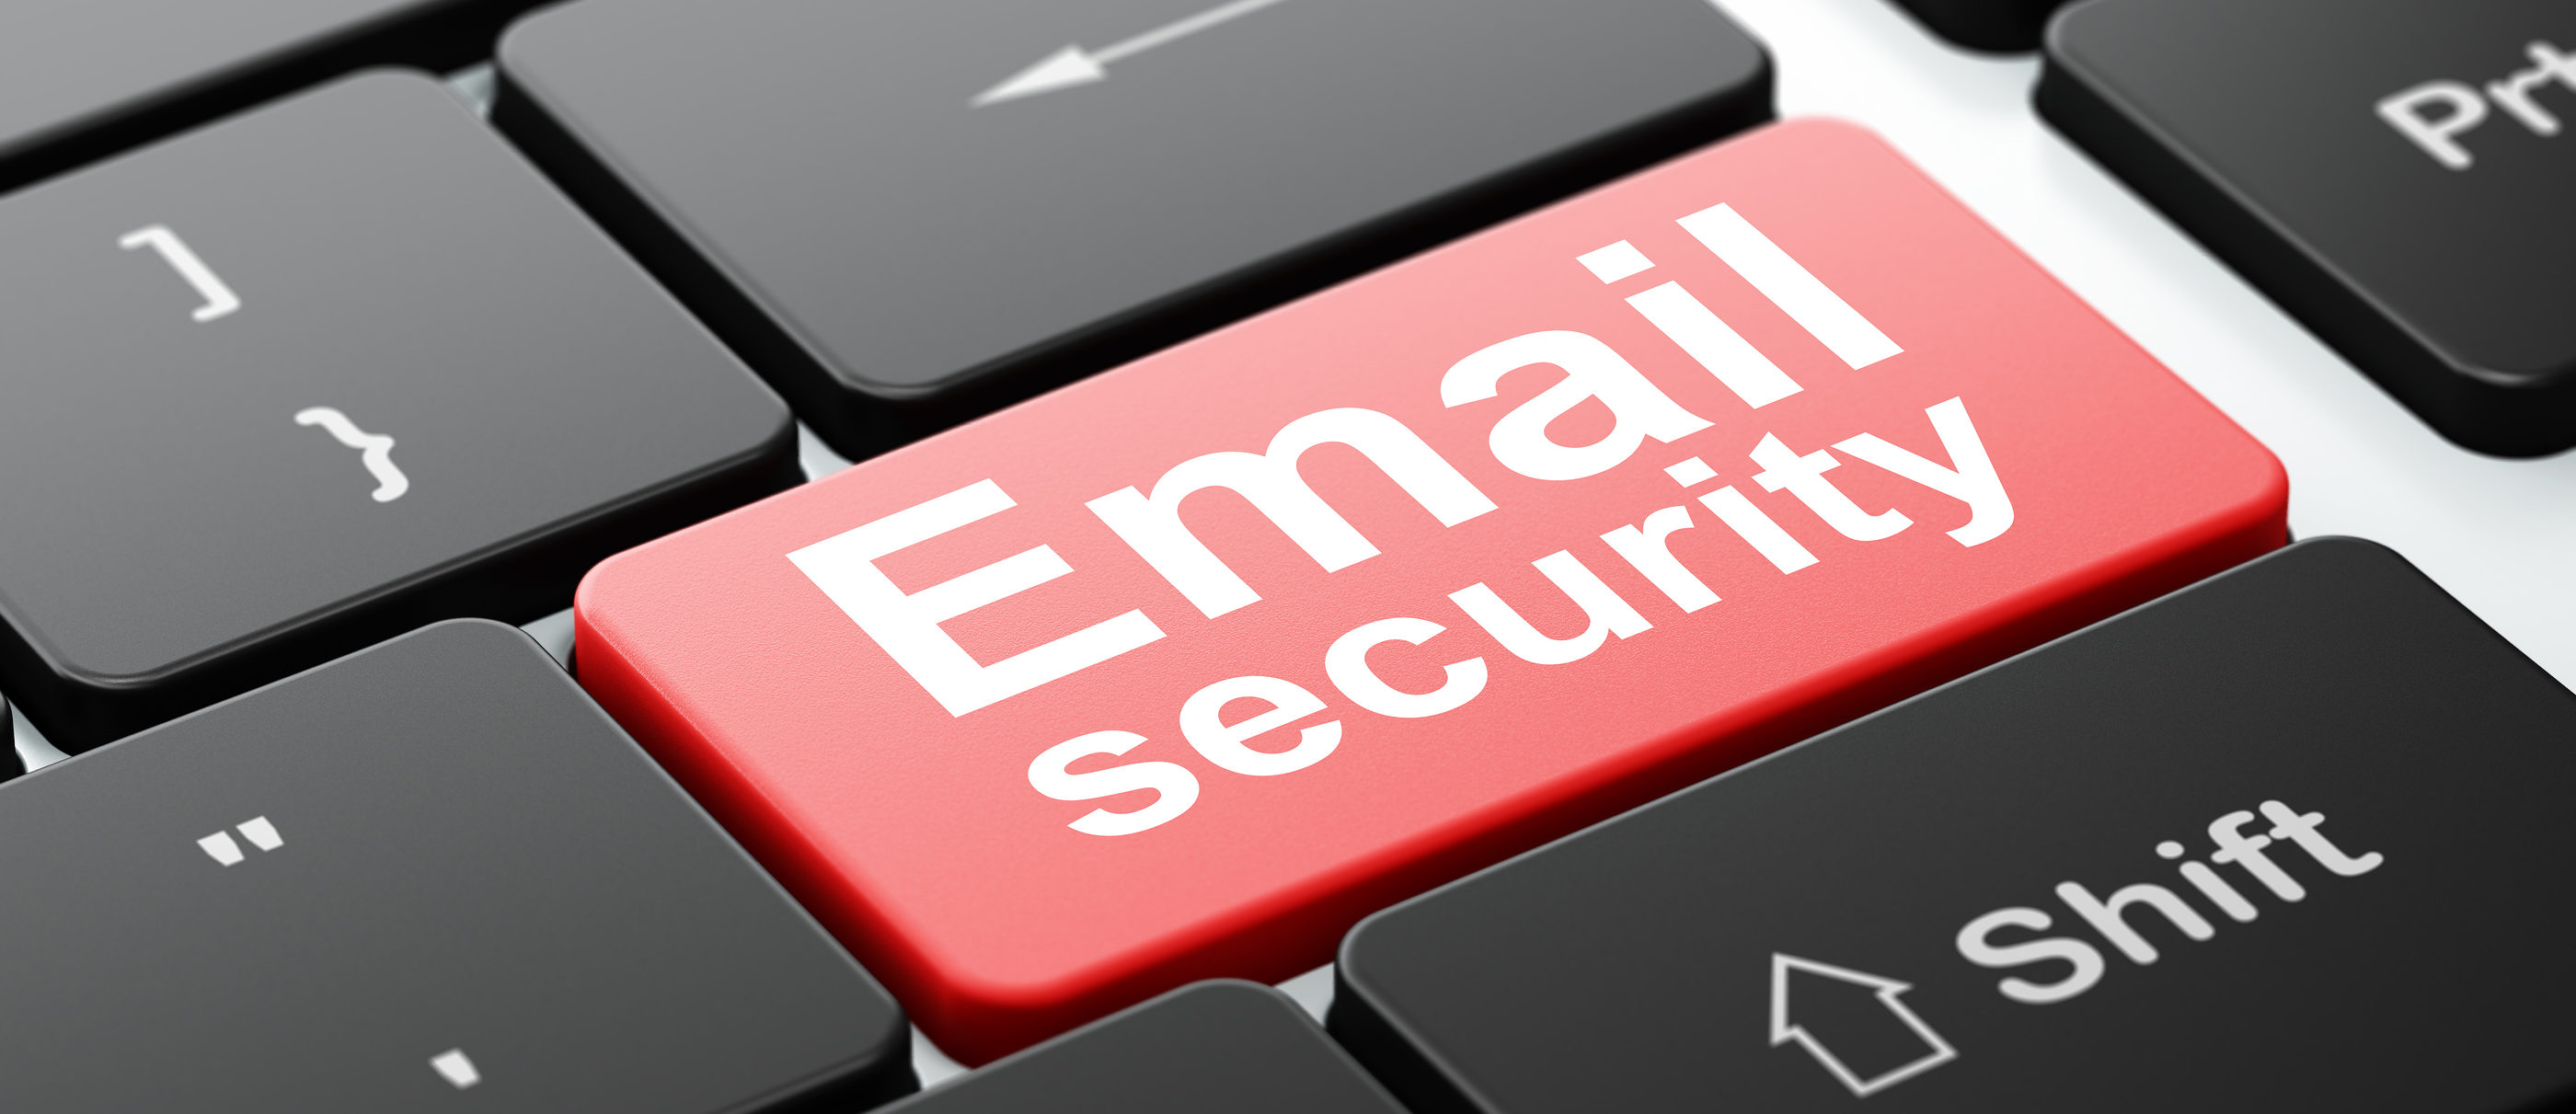 Is Your Email an Open Door for Hackers? Crucial Email Security Tips to Give You a "Fort Knox Strong" Inbox